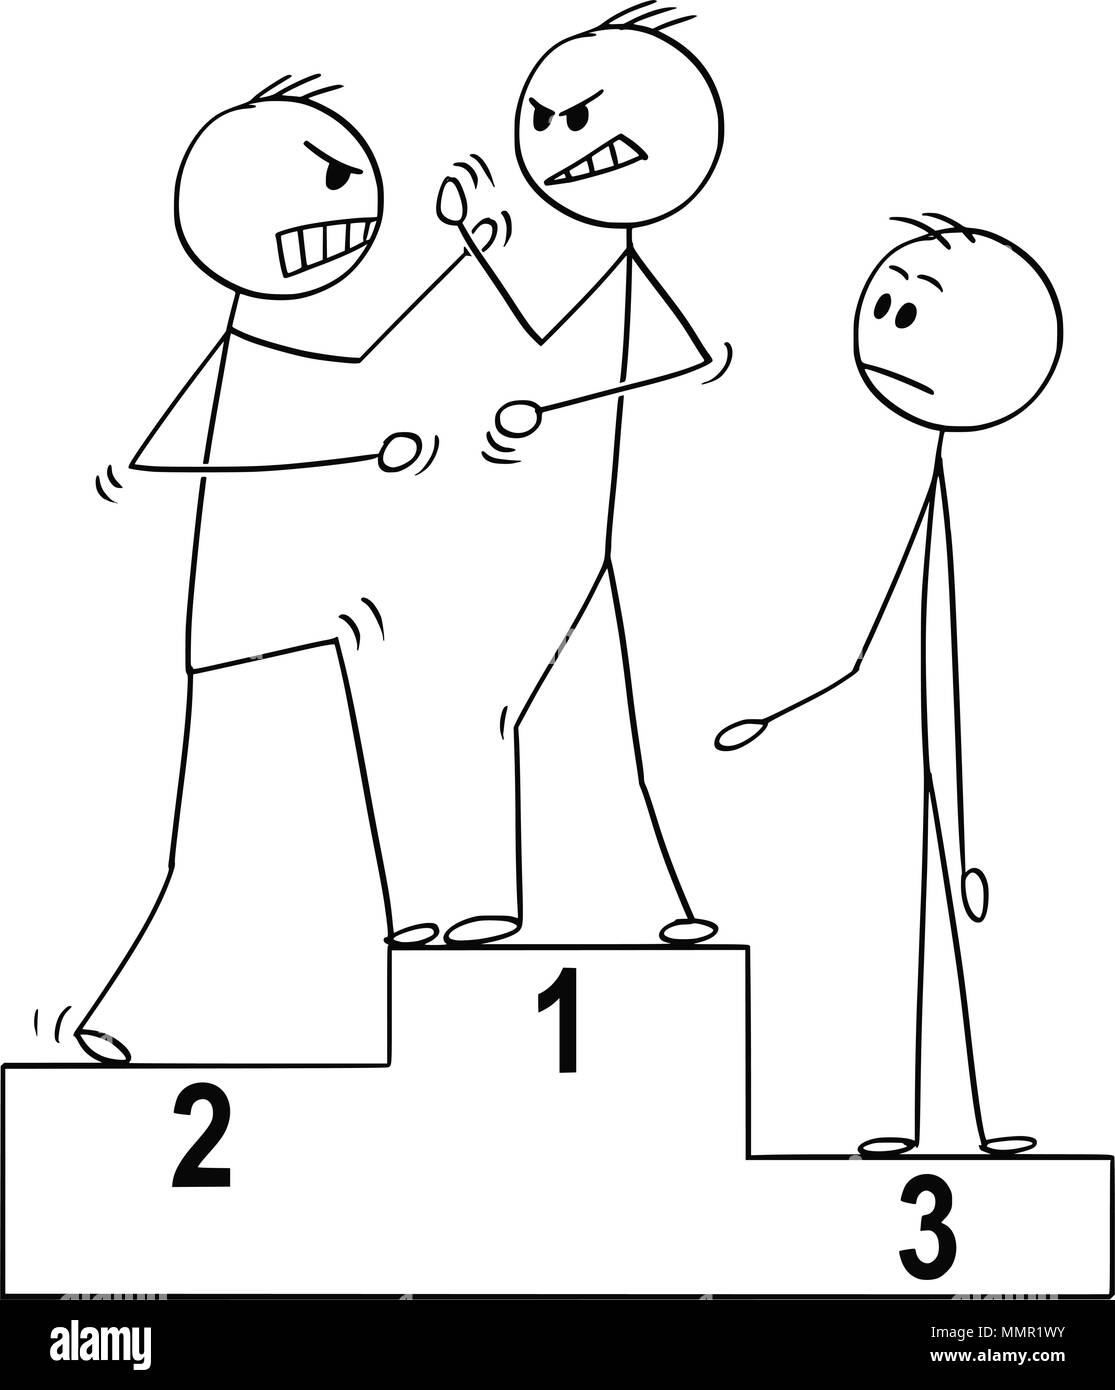 Cartoon of Three Man on Sport Winners Podium, Two of Them Are Fighting or Arguing Stock Vector